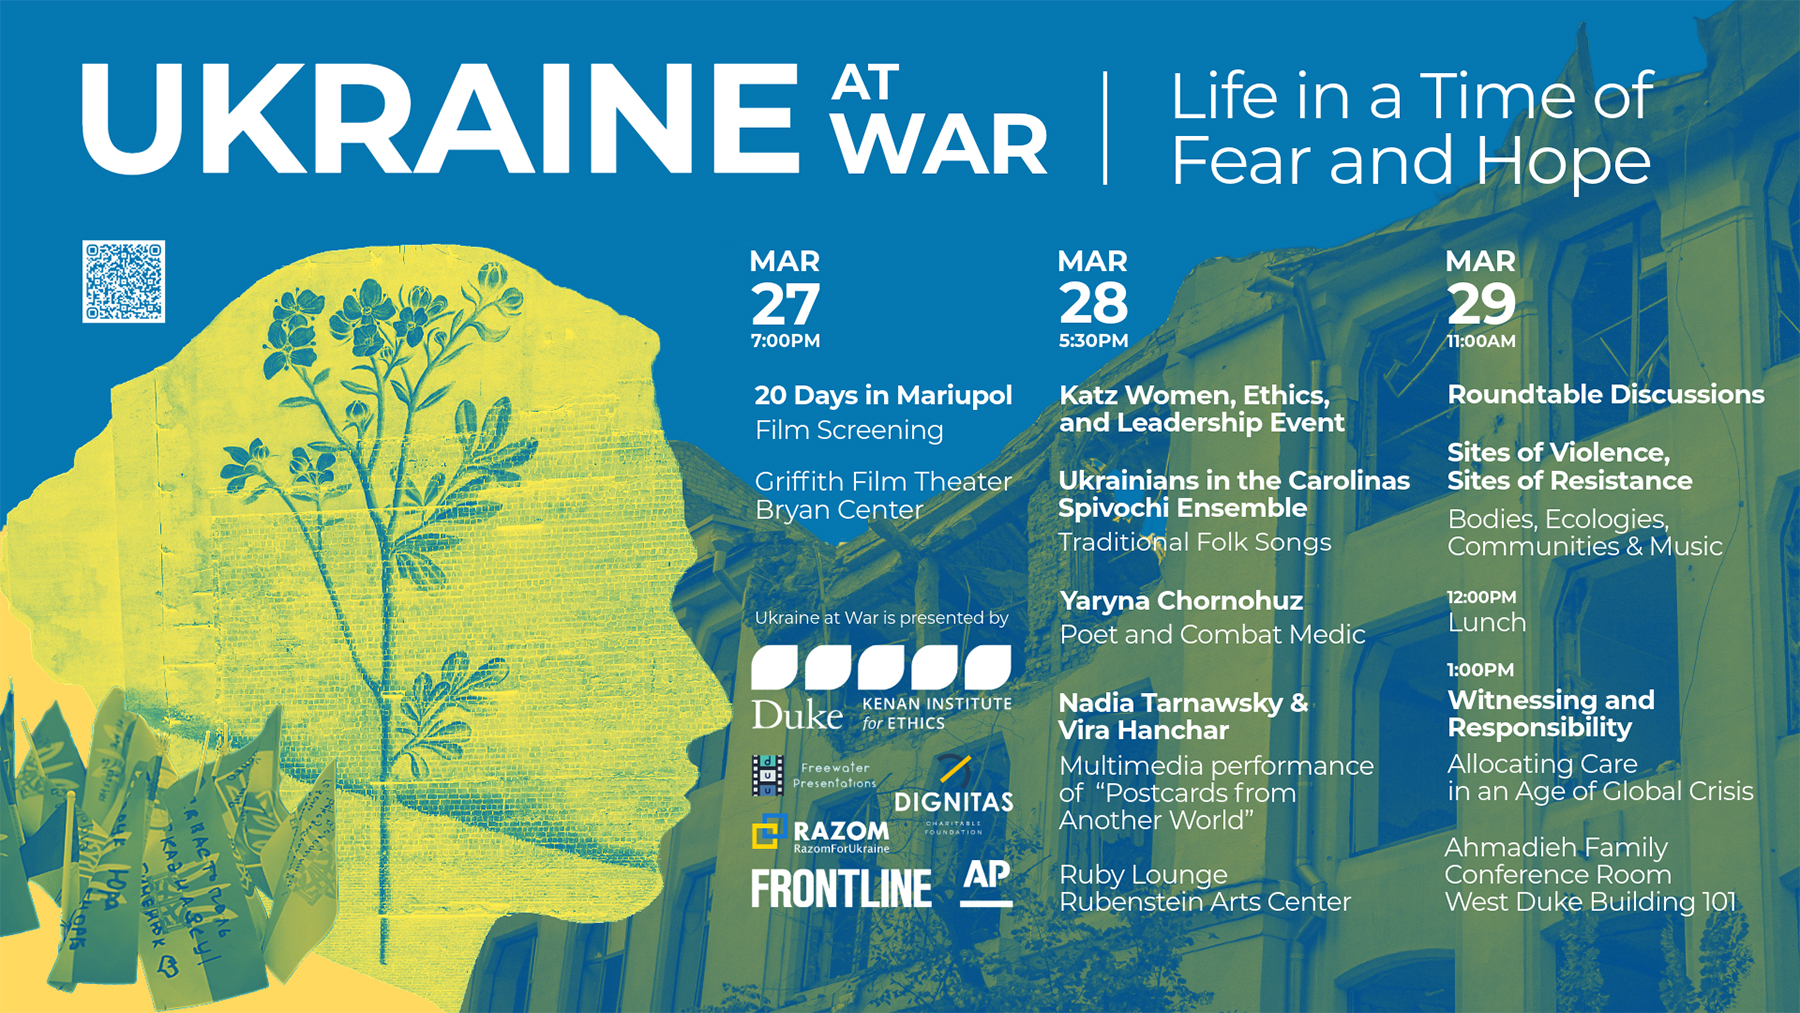 Collaged images of a mural of a woman's silhouette with a flower rising through her head; a bombed building; and memorial flags; all duotoned with the yellow and blue colors of the Ukrainian flag. Event description in body